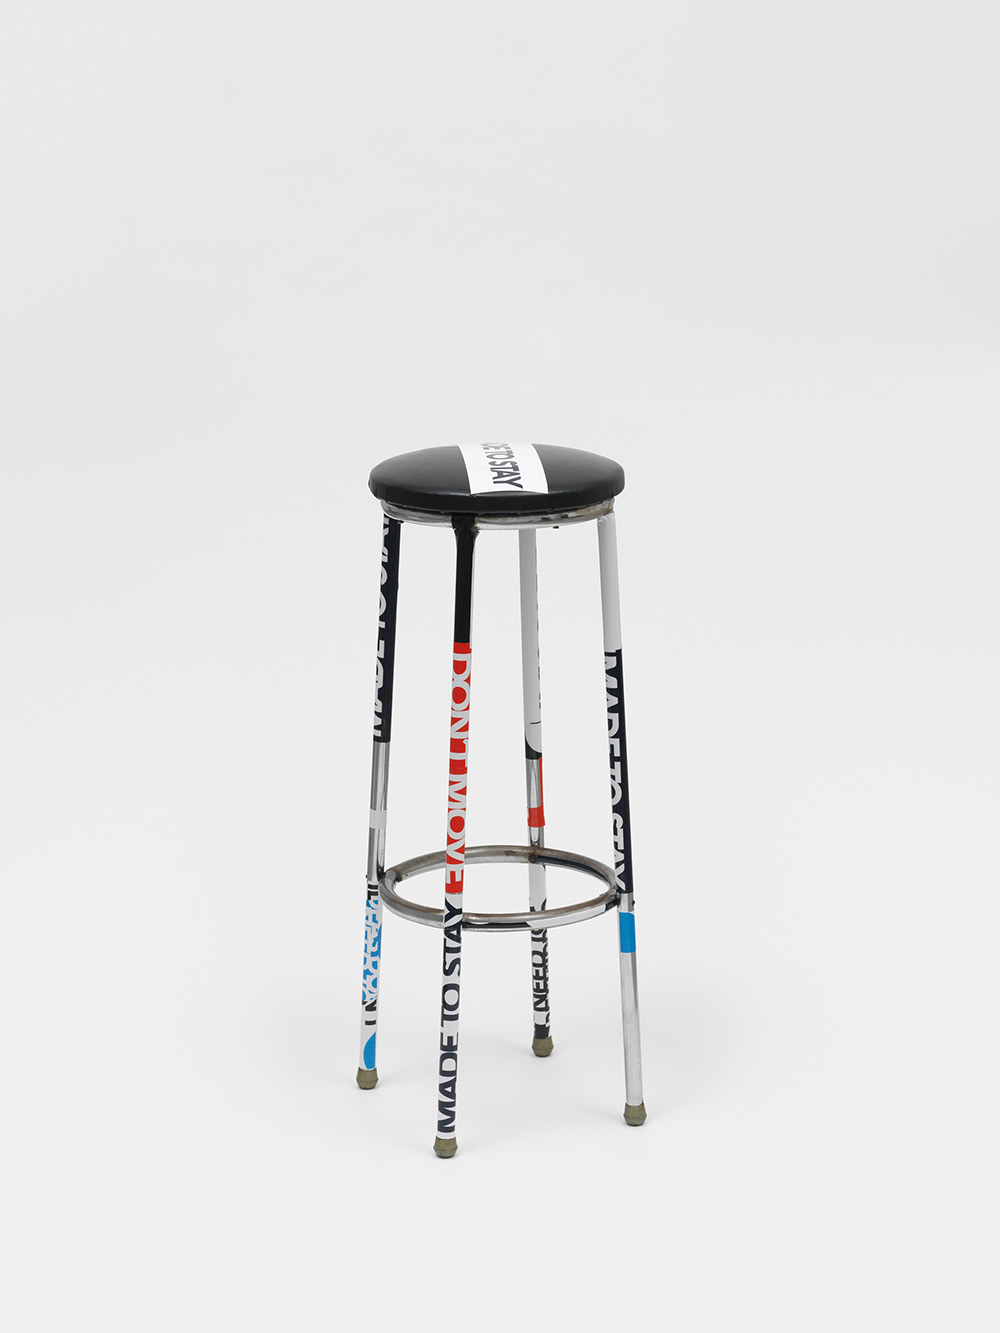 Product image: Bar Stool, modified by Vasso & Finn, claim stickers, 2022 Athens, 4.6 tons